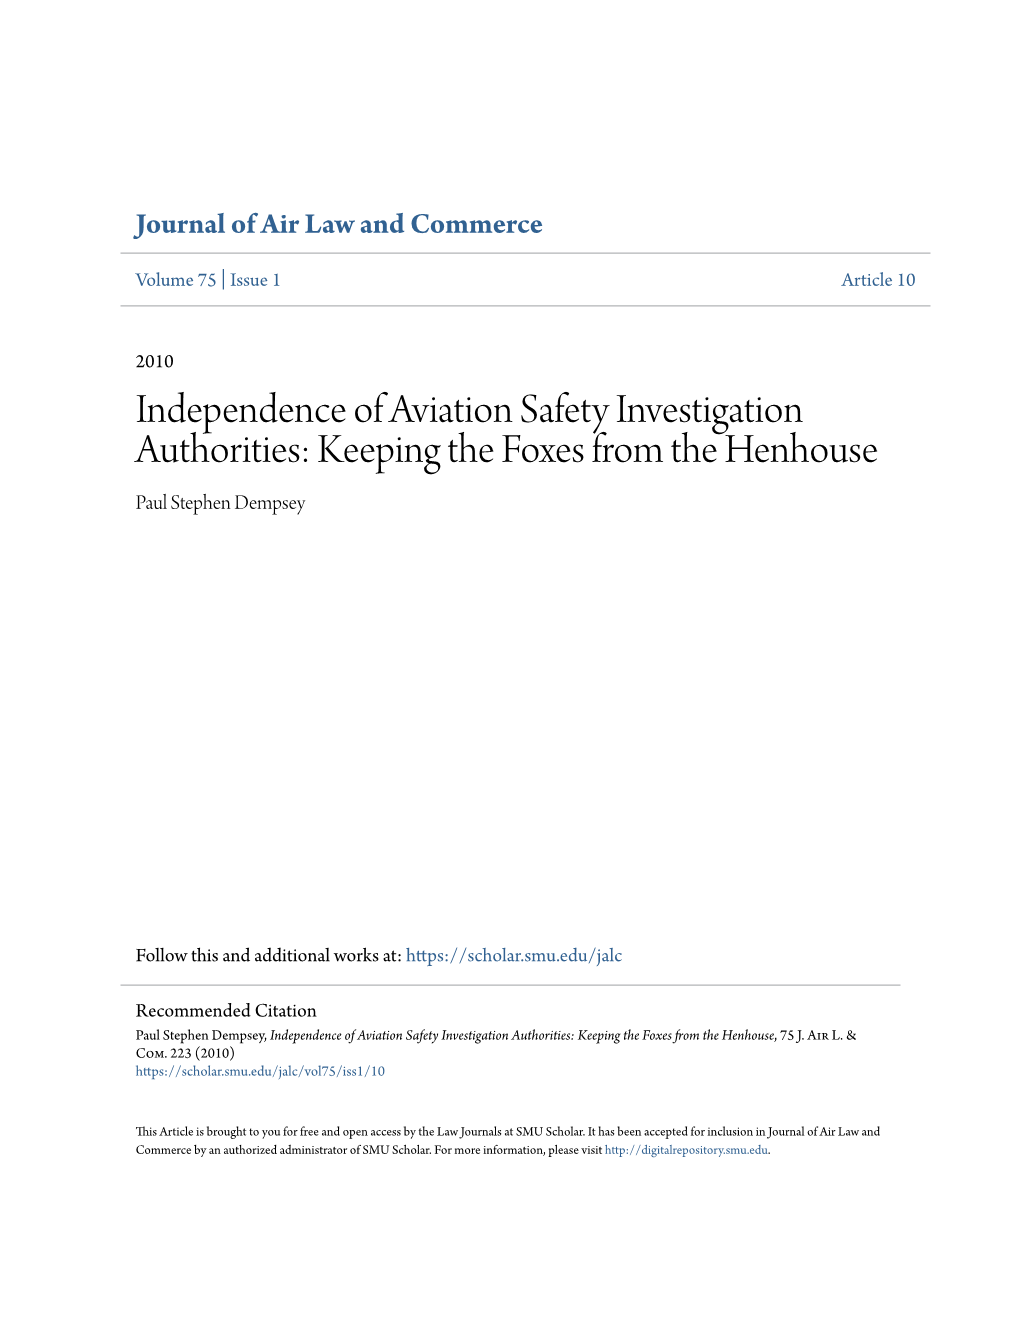 Independence of Aviation Safety Investigation Authorities: Keeping the Foxes from the Henhouse Paul Stephen Dempsey